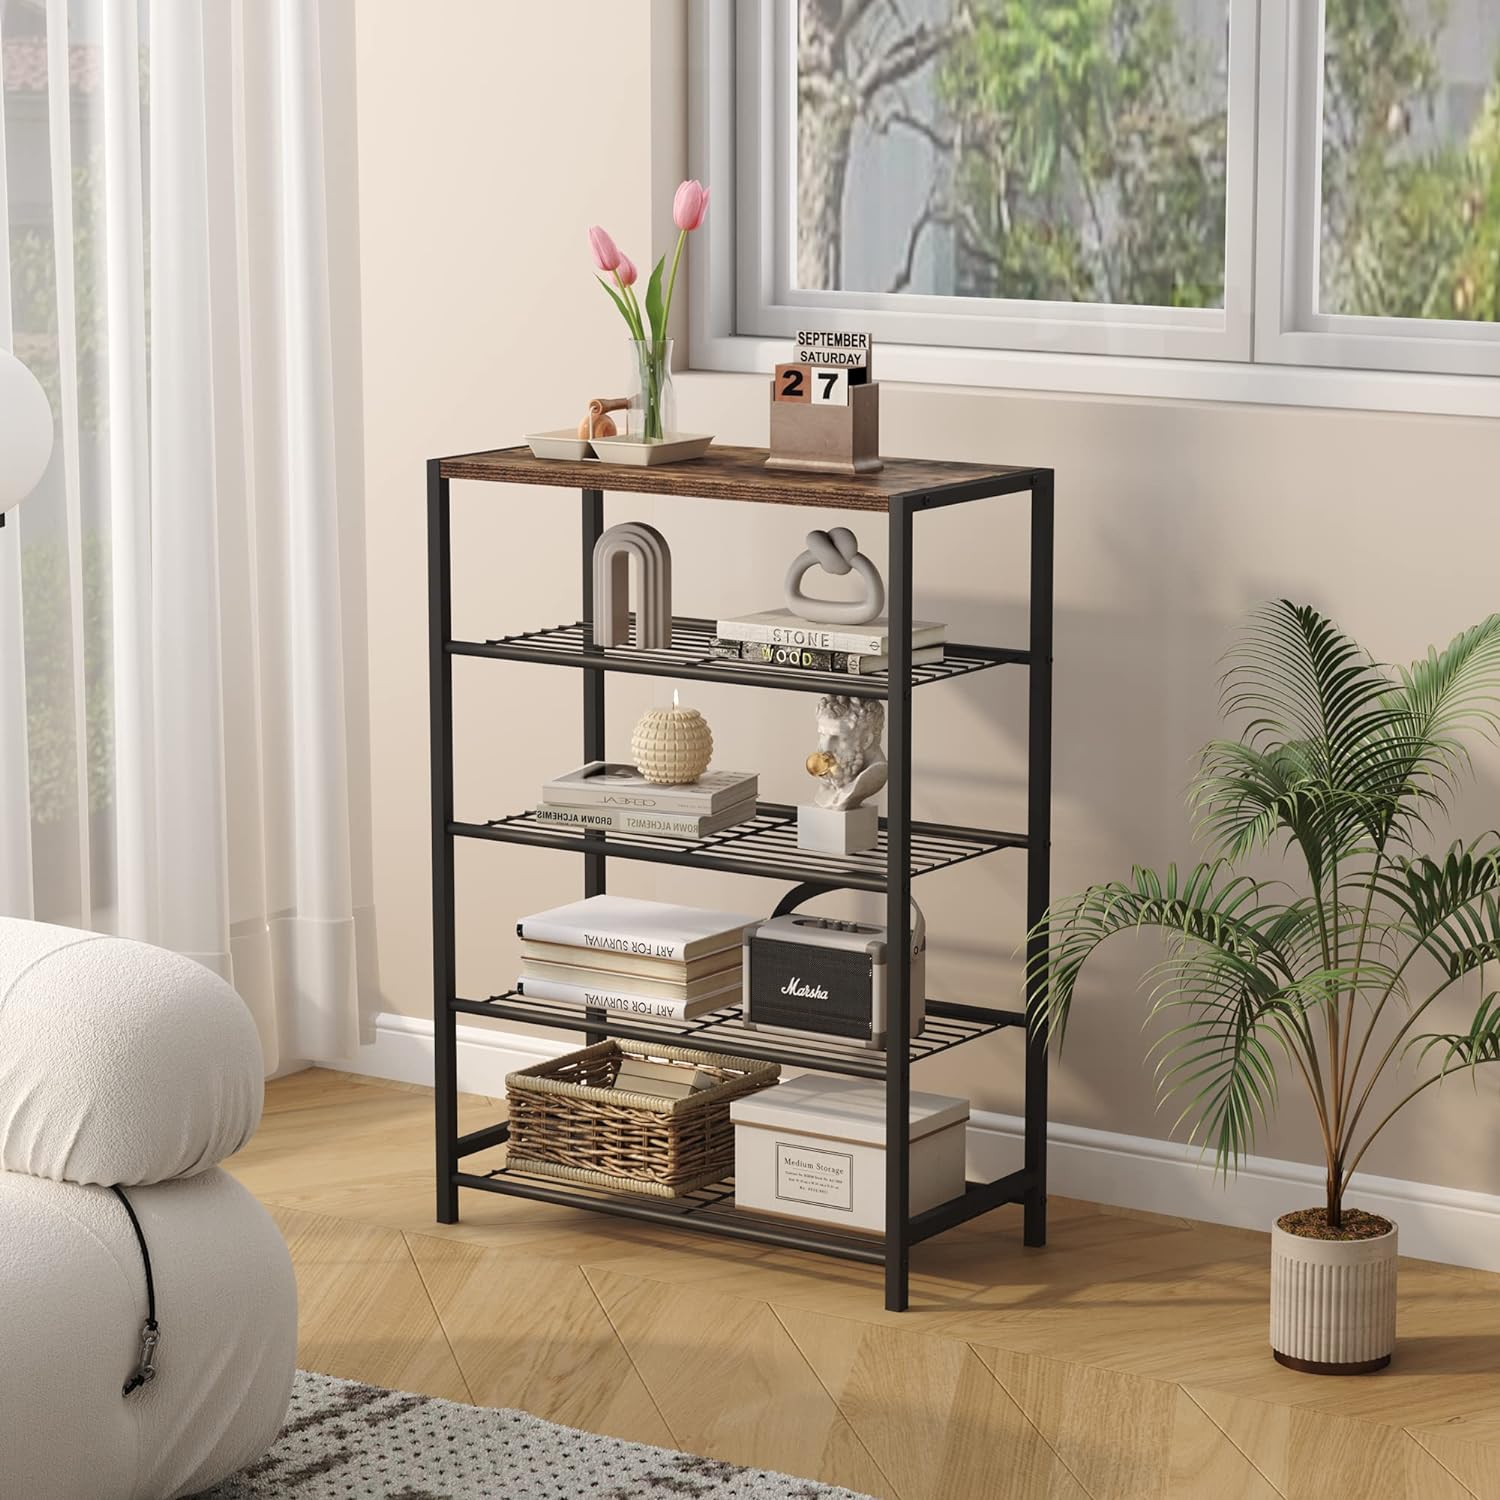 https://bigbigmart.com/wp-content/uploads/2023/12/HOMEFORT-5-Tier-Metal-Shoe-Rack-All-Metal-Shoe-Tower-Shoe-Storage-Shelf-with-MDF-Top-Board-Each-Tier-Fits-3-Pairs-of-Shoes-Entryway-Shoes-Organizer-with-Sturdy-Metal-Shelves-in-Rustic-Brown3.jpg